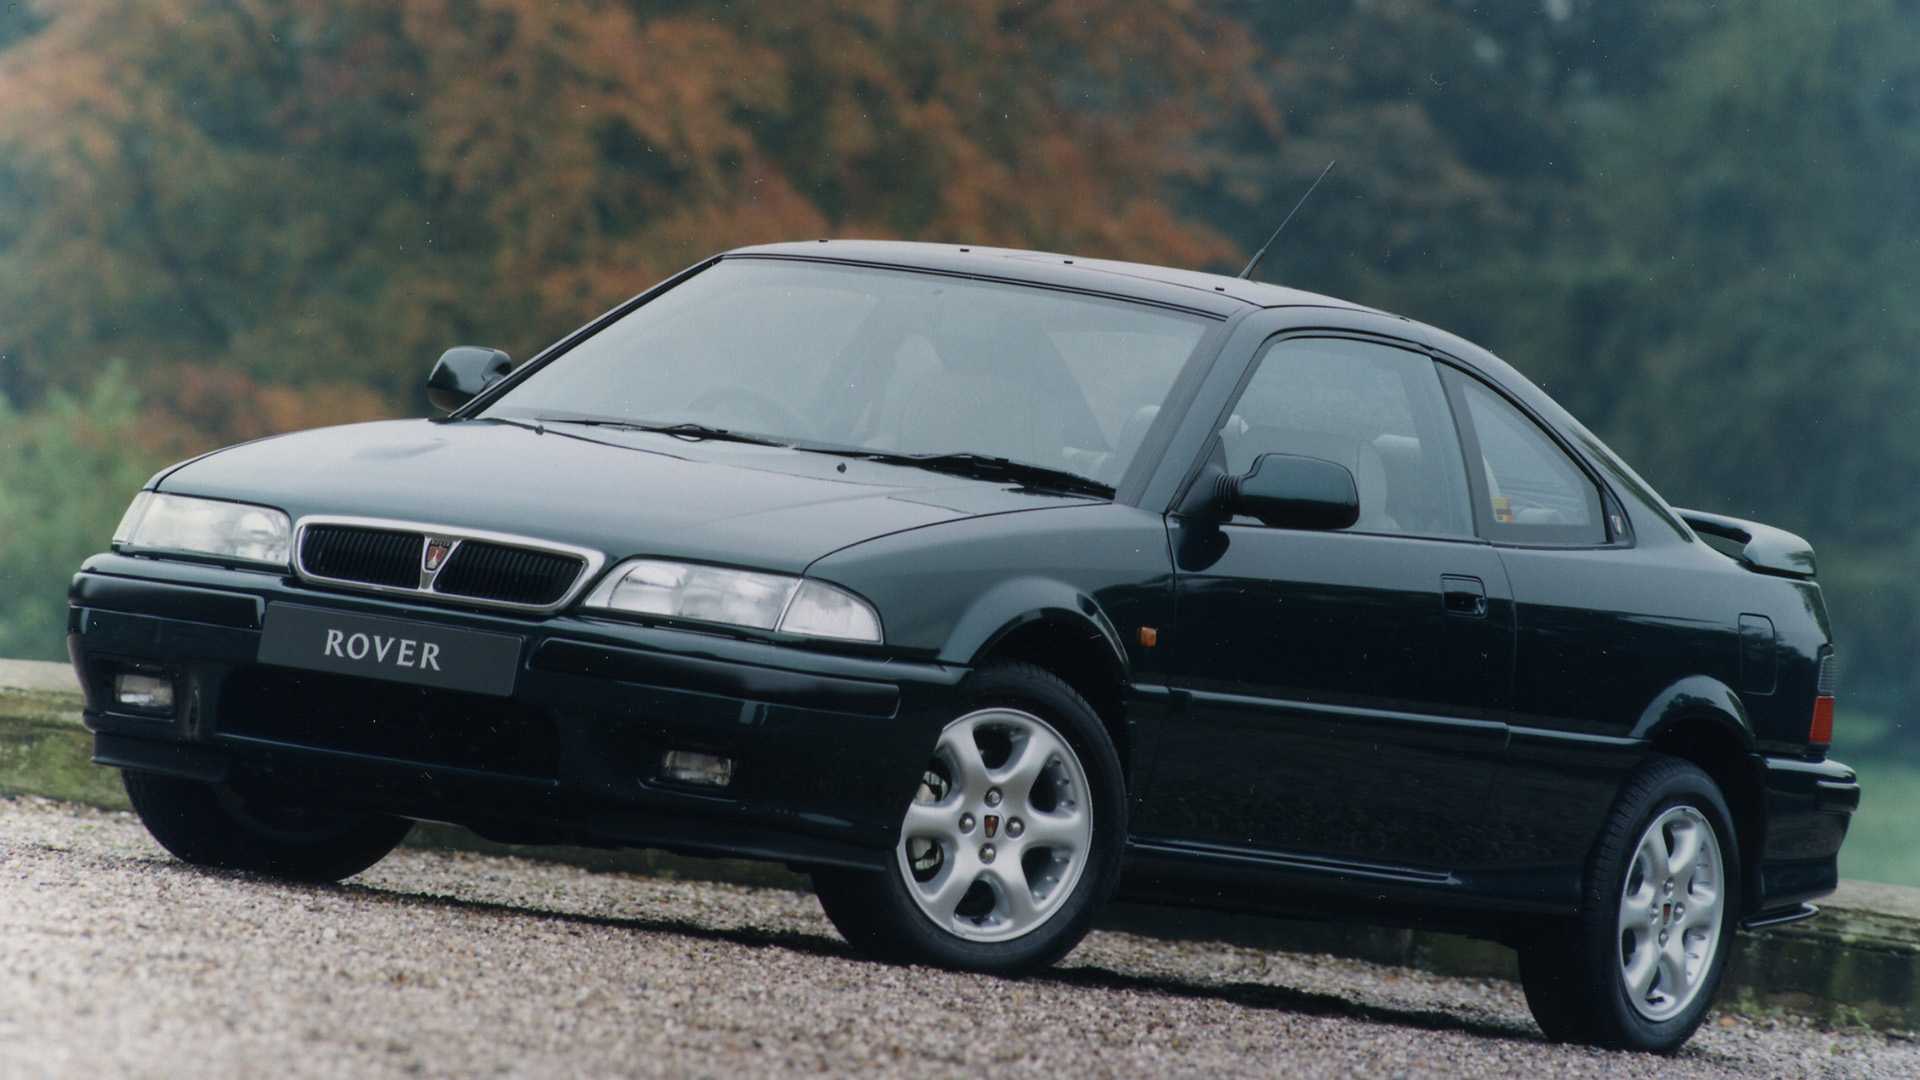 Peaking Tomcat: 30 years of the record-breaking Rover 200 Coupé